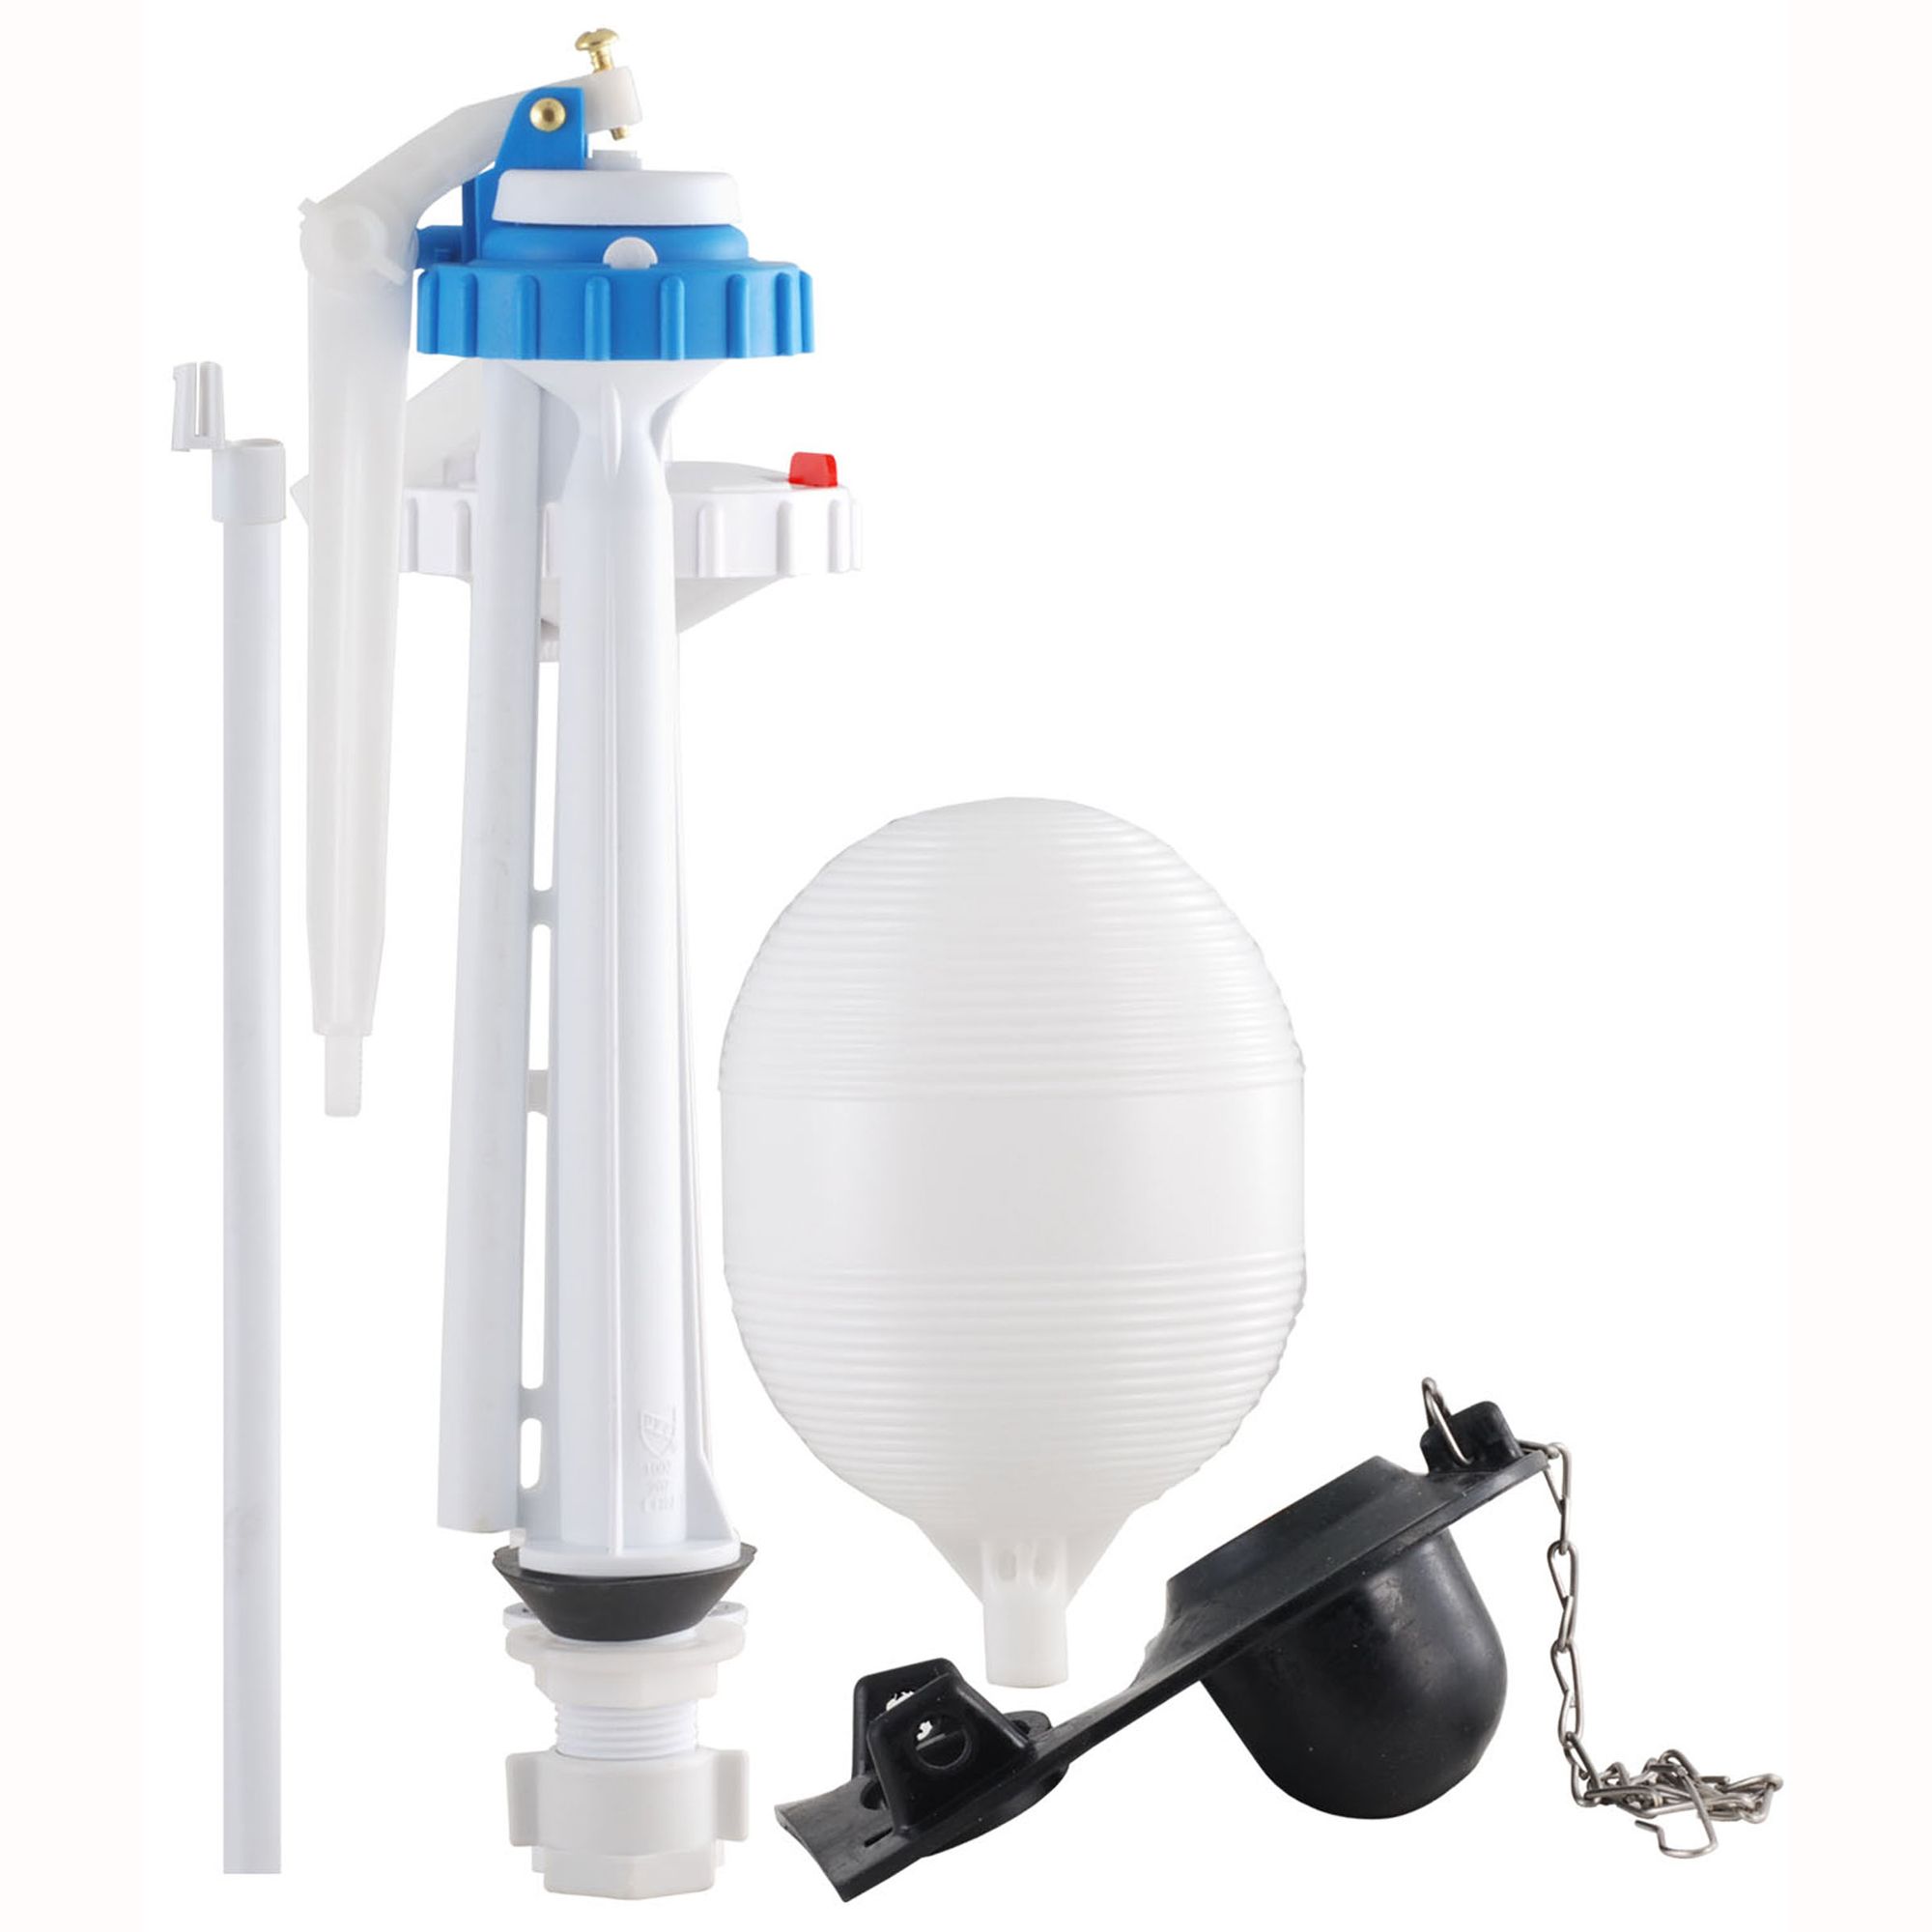 LDR Industries Toilet Tank Repair Kit 9" with Anti-Siphon Ballcock, Refill Tube, Flapper and Ball